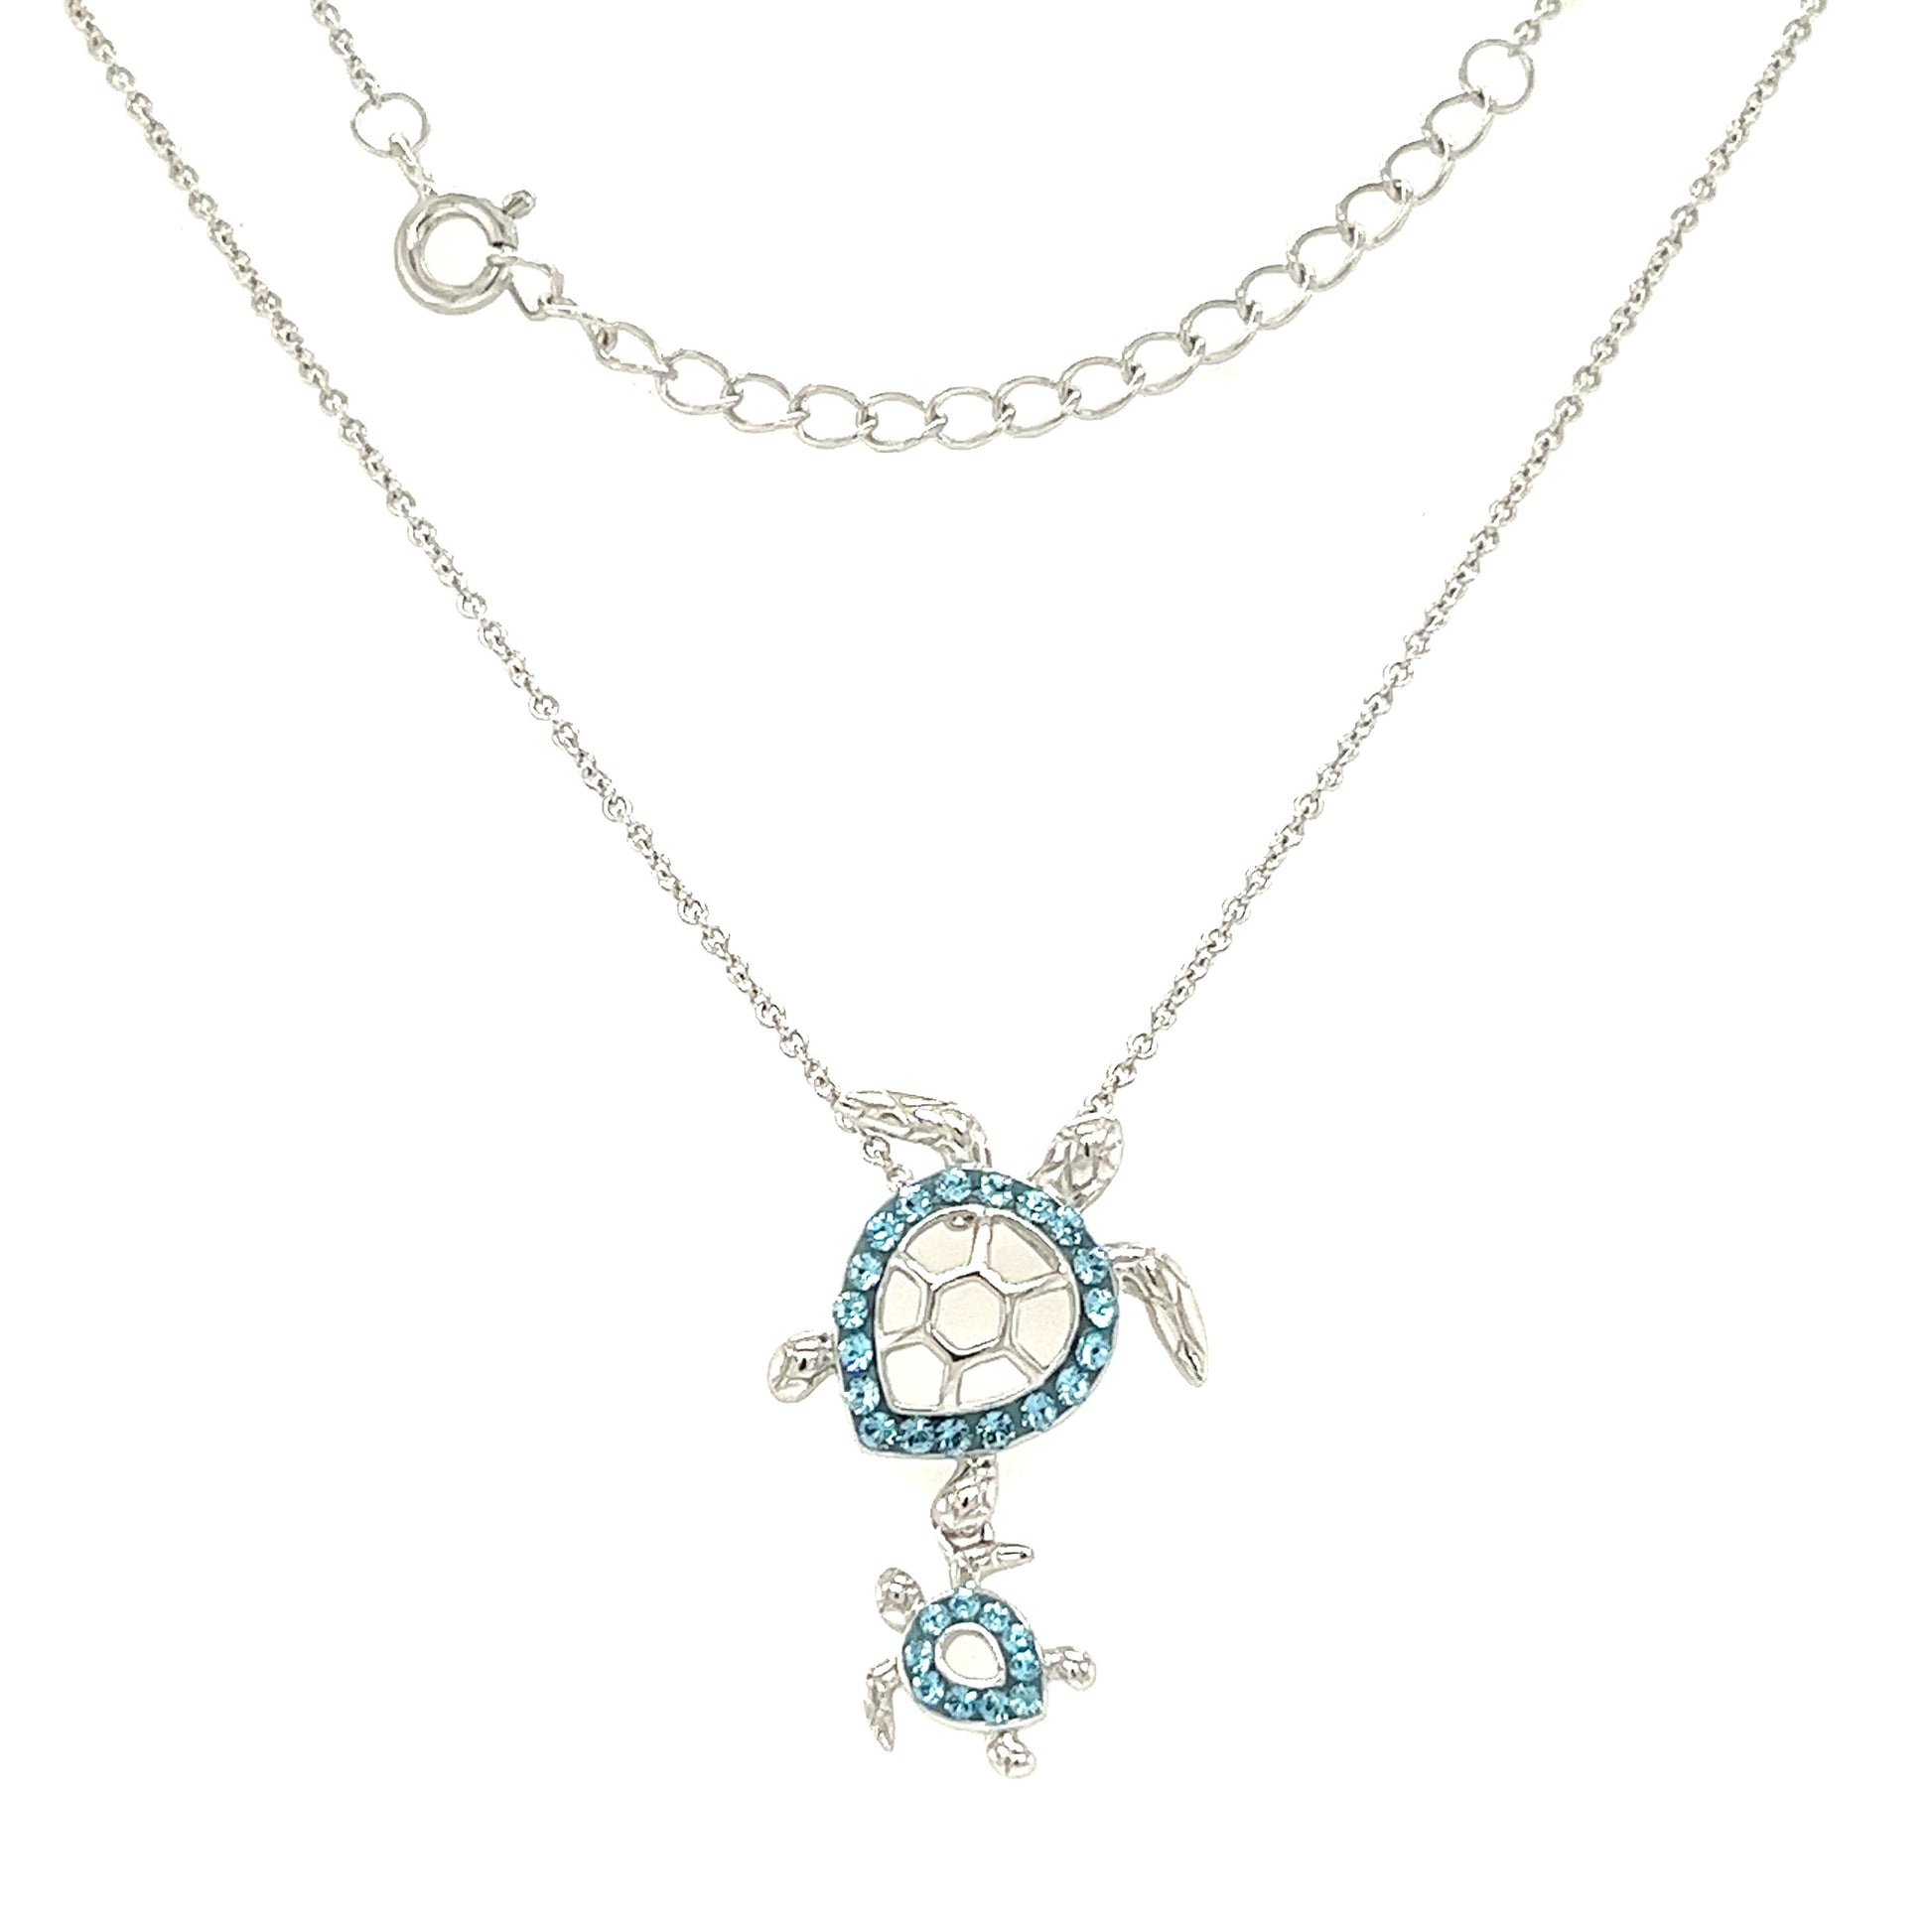 Mother and Baby Sea Turtle Necklace with Aqua Crystals in Sterling Silver Front View